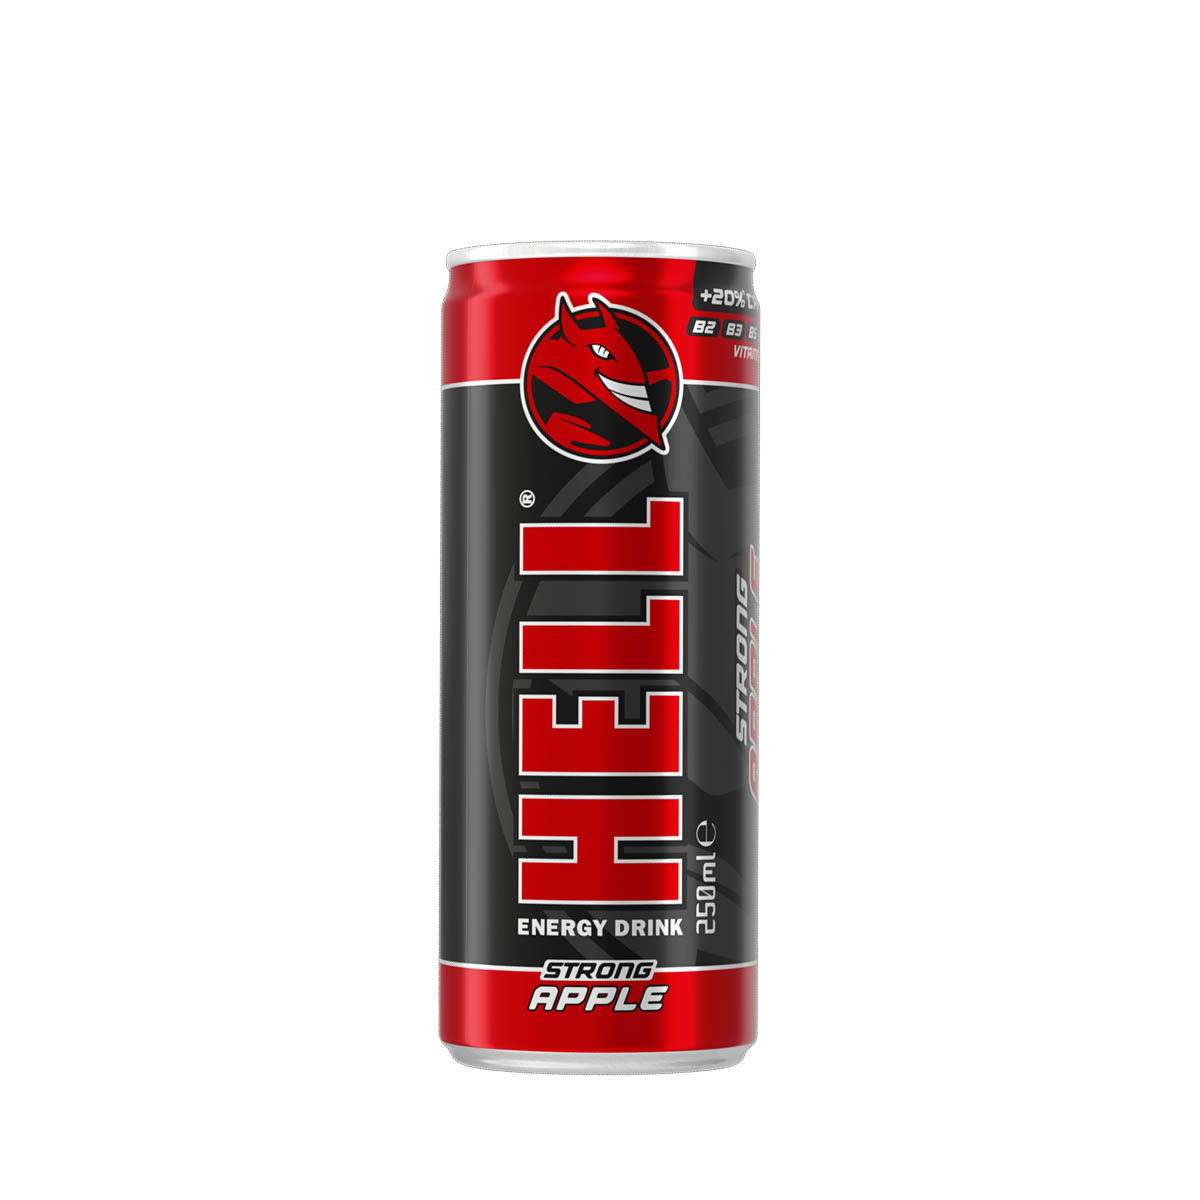 HELL STRONG APPLE 250ml